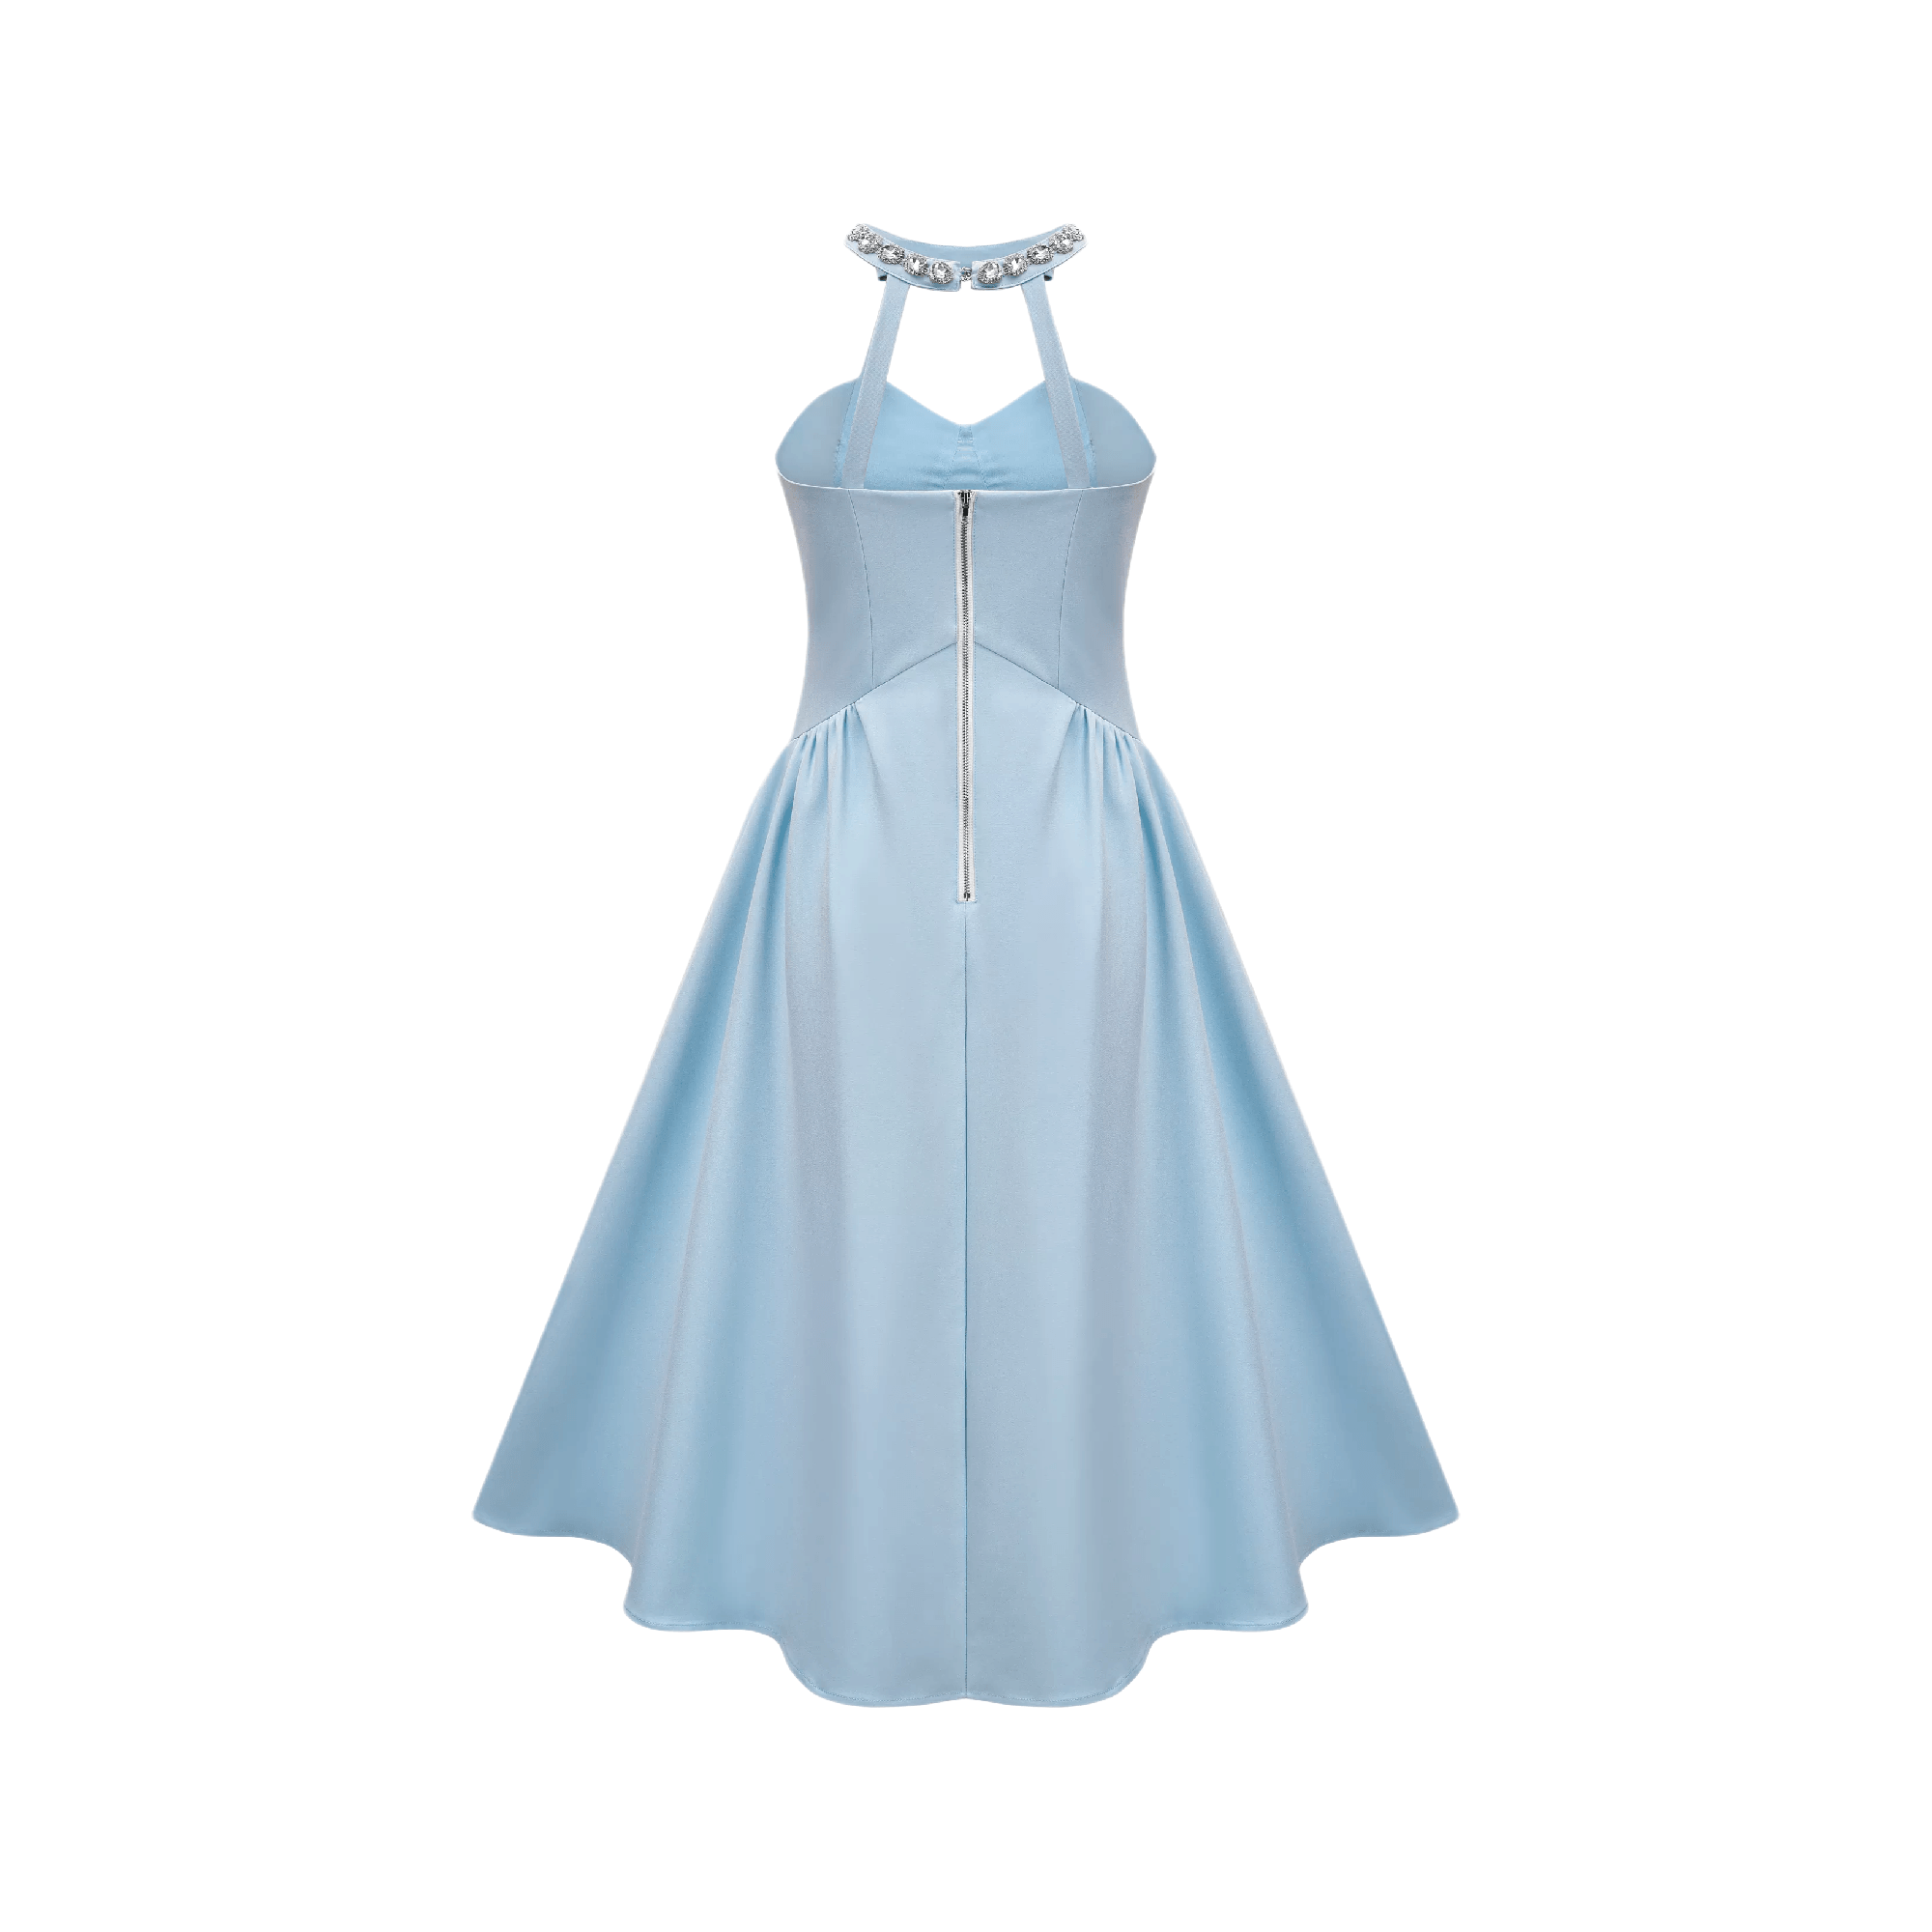 Serio Ludere-crystal-embellished princess dress (Editor's Pick) - itsy, it‘s different